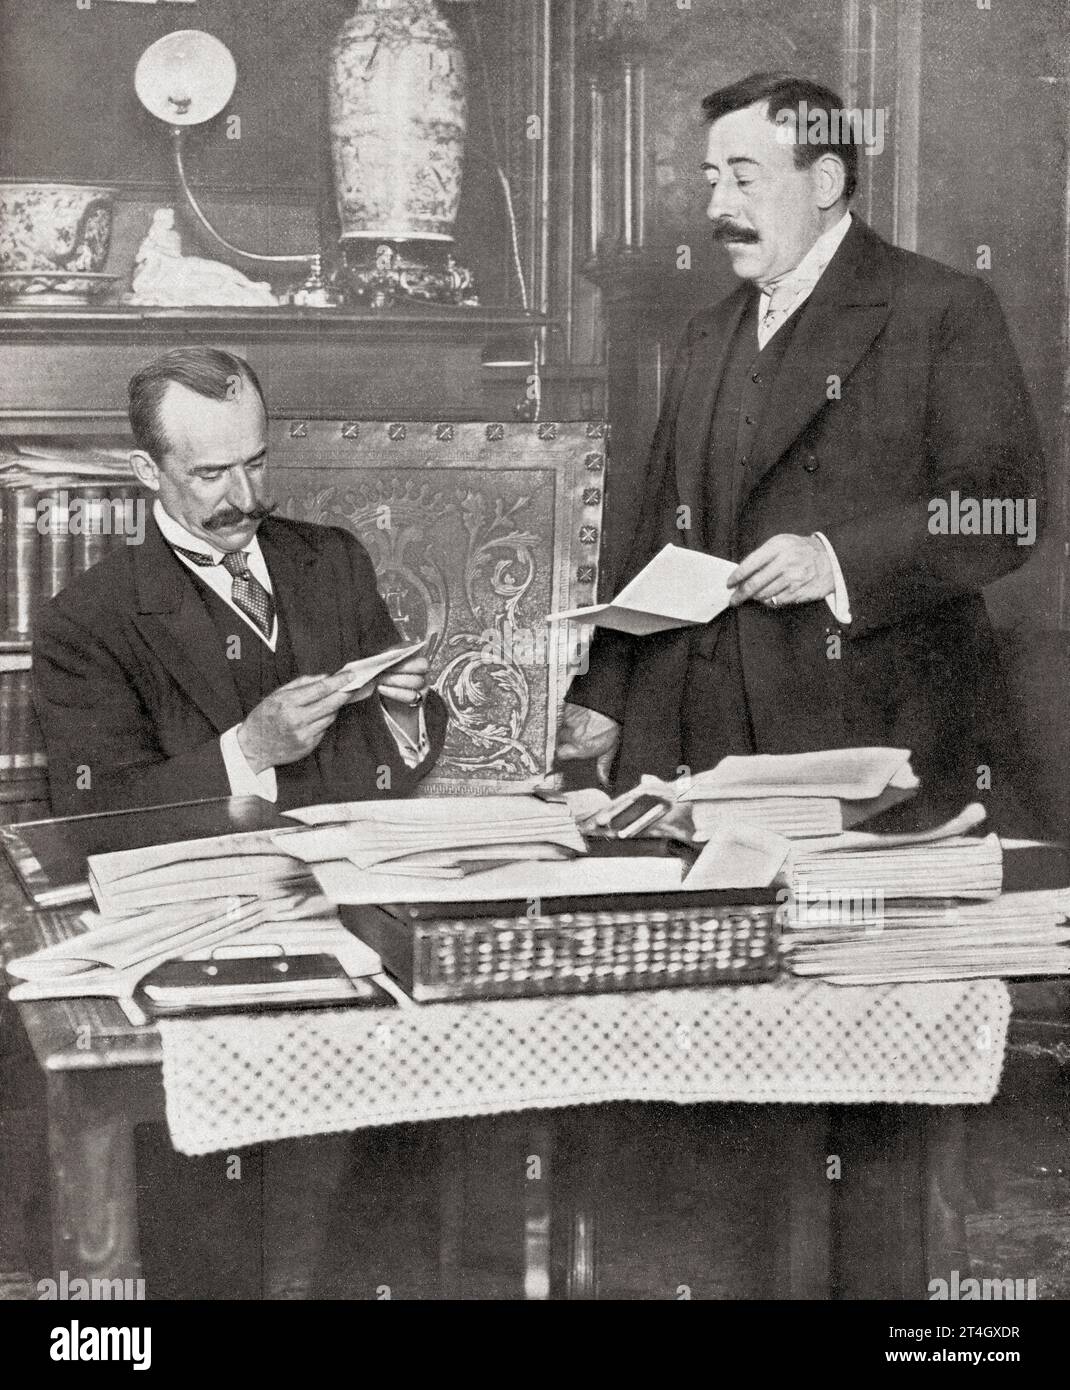 Álvaro de Figueroa y Torres-Sotomayor, 1st Count of Romanones, 1863 – 1950. Spanish politician, businessman and three times Prime Minister of Spain. Seen here on the left, in his office with his secretary Señor Brocas. From Mundo Grafico, published 1912. Stock Photo